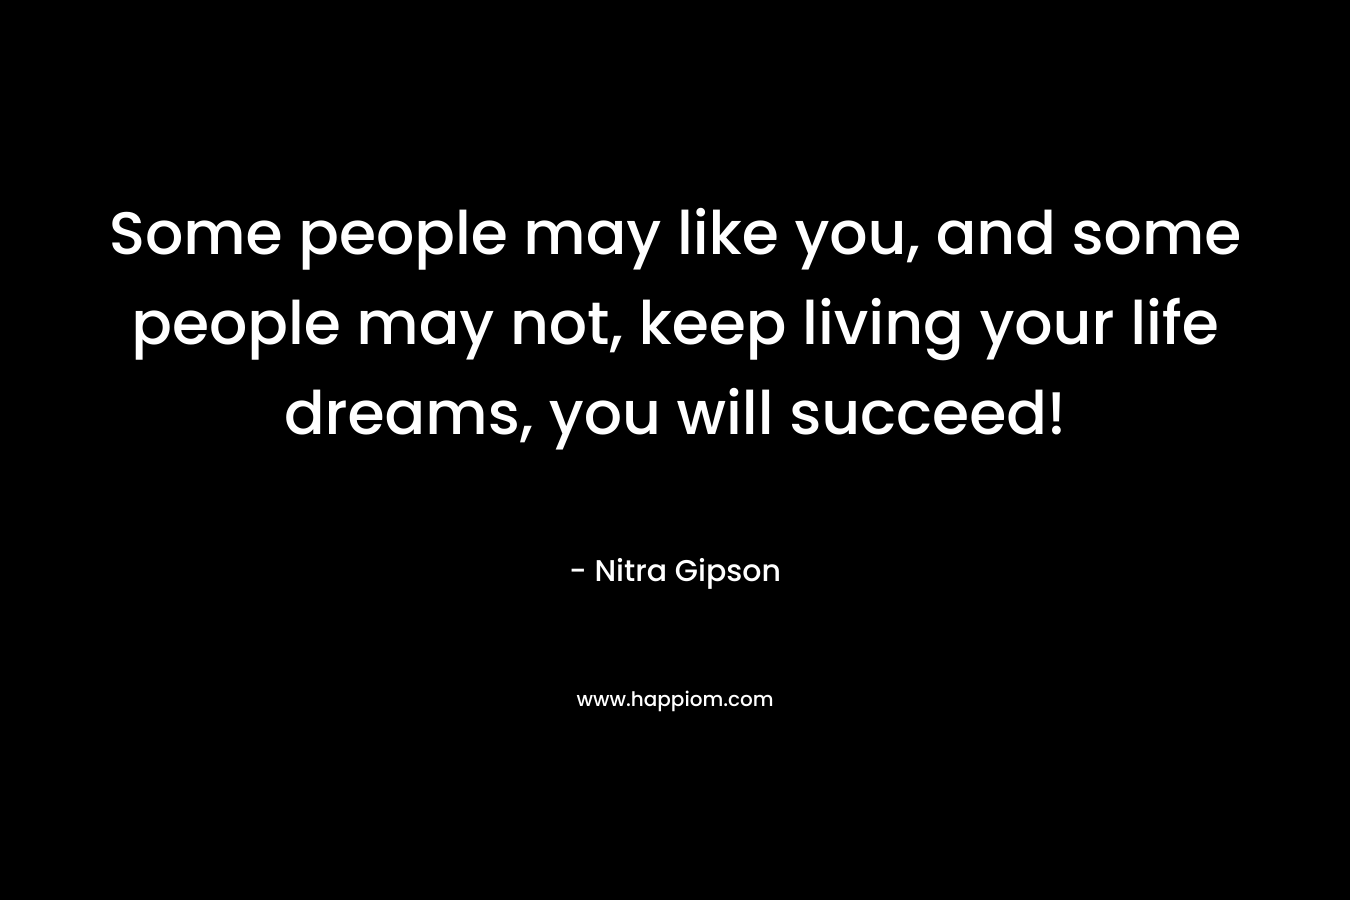 Some people may like you, and some people may not, keep living your life dreams, you will succeed!